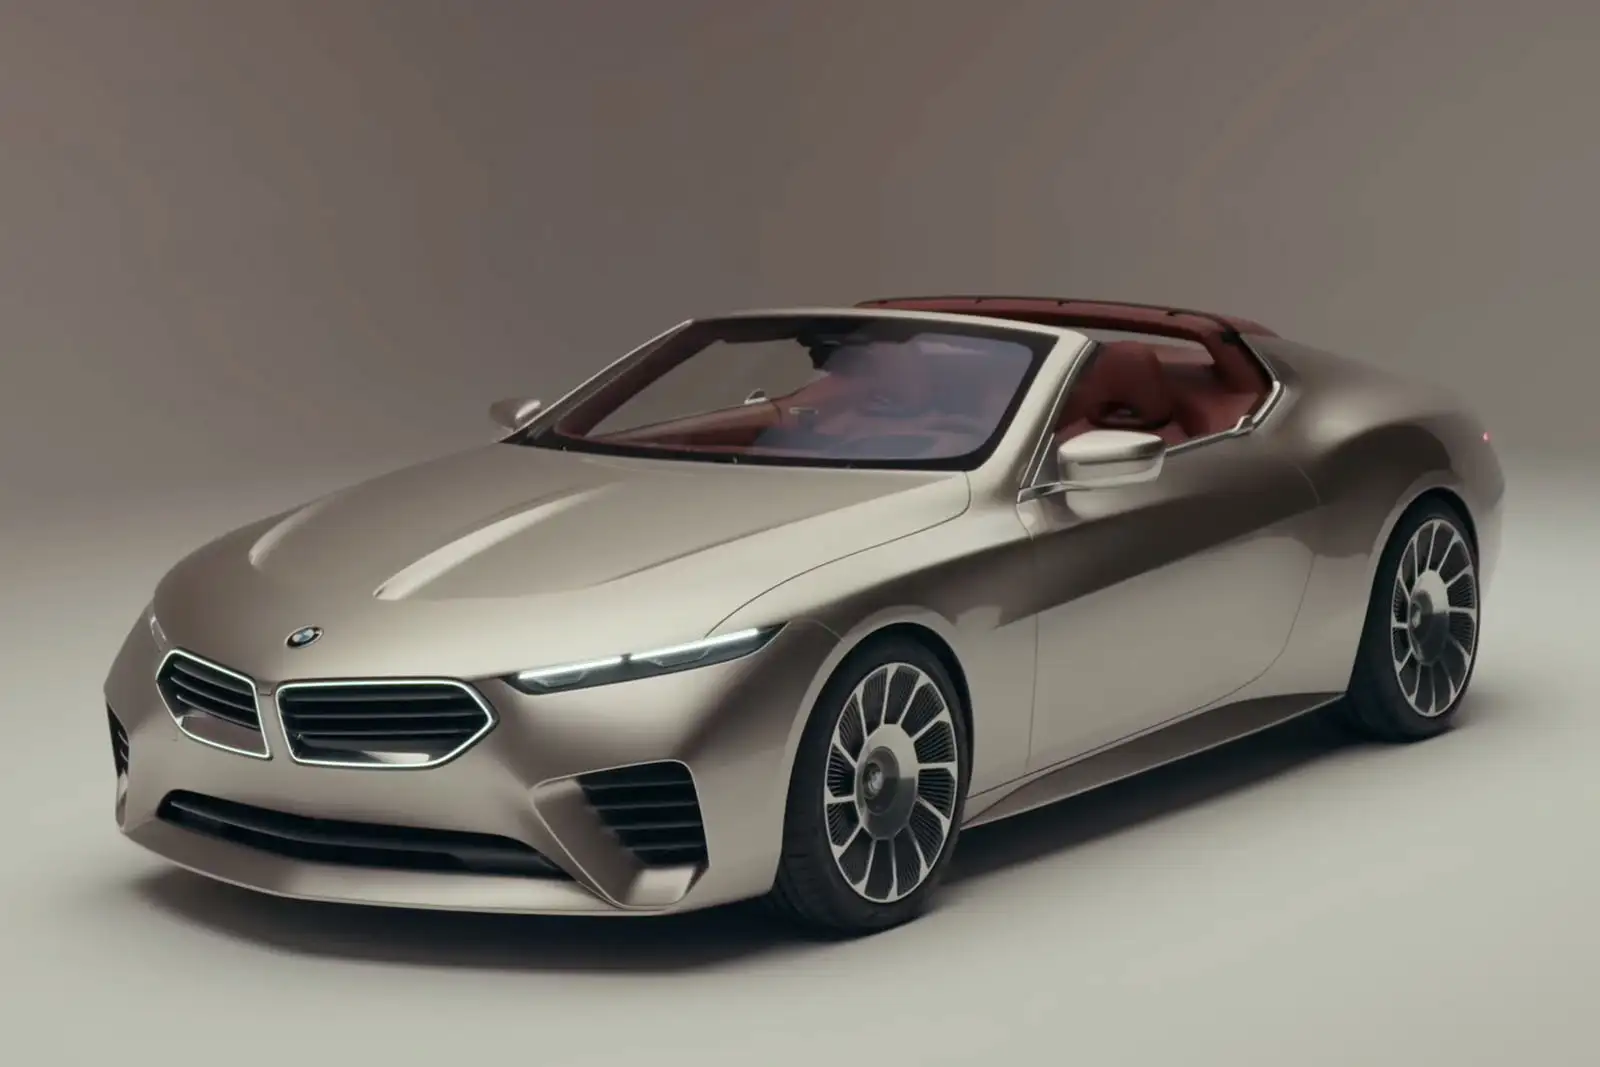 Early Glimpse: BMW Skytop Concept Leaked Before Villa d'Este Debut